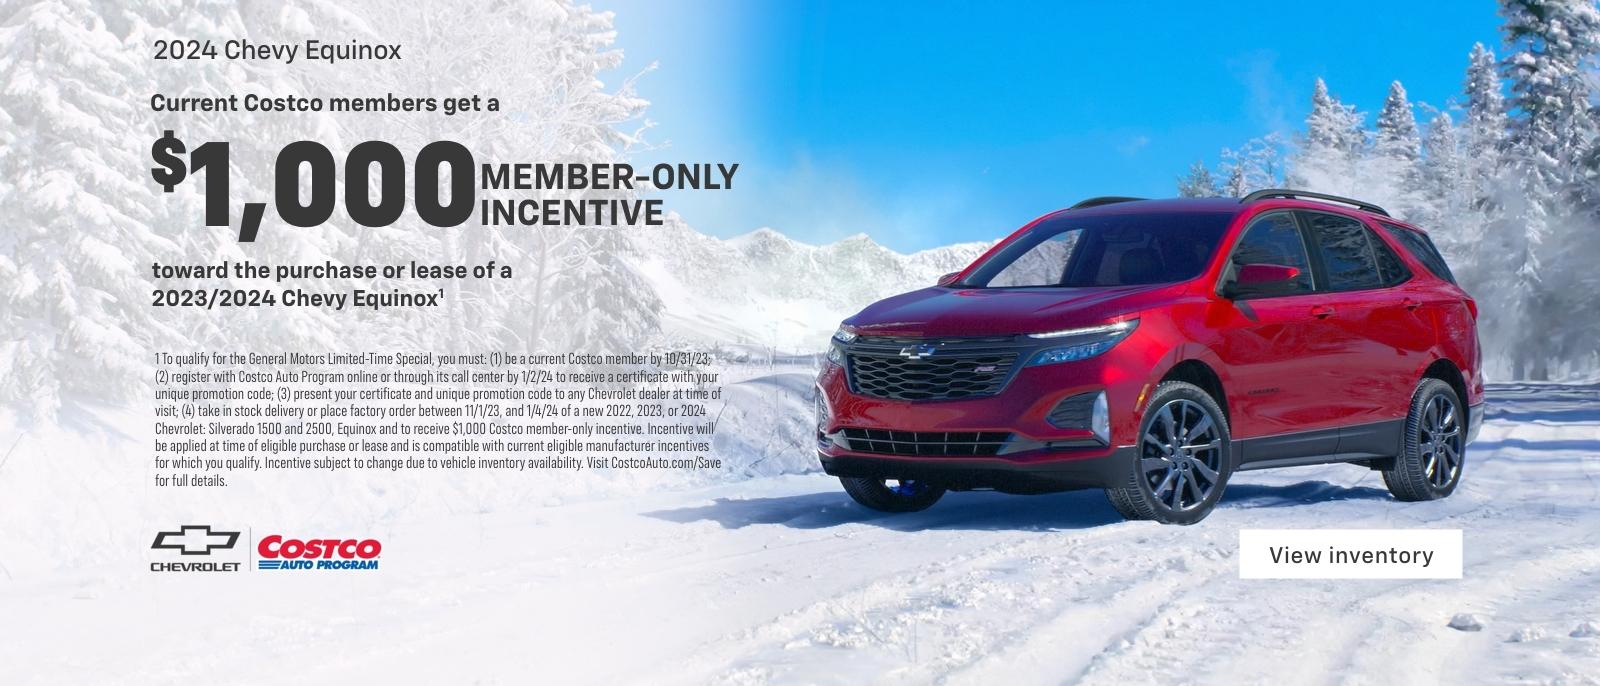 Current Costco members get a $1,000 member-only incentive toward the purchase or lease of a 2023/2024 Chevy Equinox. 1 To qualify for the General Motors Limited-Time Special, you must: (1) be a current Costco member by 10/31/23; (2) register with Costco Auto Program online or through its call center by 1/2/24 to receive a certificate with your unique promotion code; (3) present your certificate and unique promotion code to any Chevrolet dealer at time of visit; (4) take in stock delivery or place factory order between 11/1/23, and 1/4/24 of a new 2022, 2023, or 2024 Chevrolet: Silverado 1500 and 2500, Equinox and to receive $1,000 Costco member-only incentive. Incentive will be applied at time of eligible purchase or lease and is compatible with current eligible manufacturer incentives for which you qualify. Incentive subject to change due to vehicle inventory availability. Visit CostcoAuto.com/Save for full details.